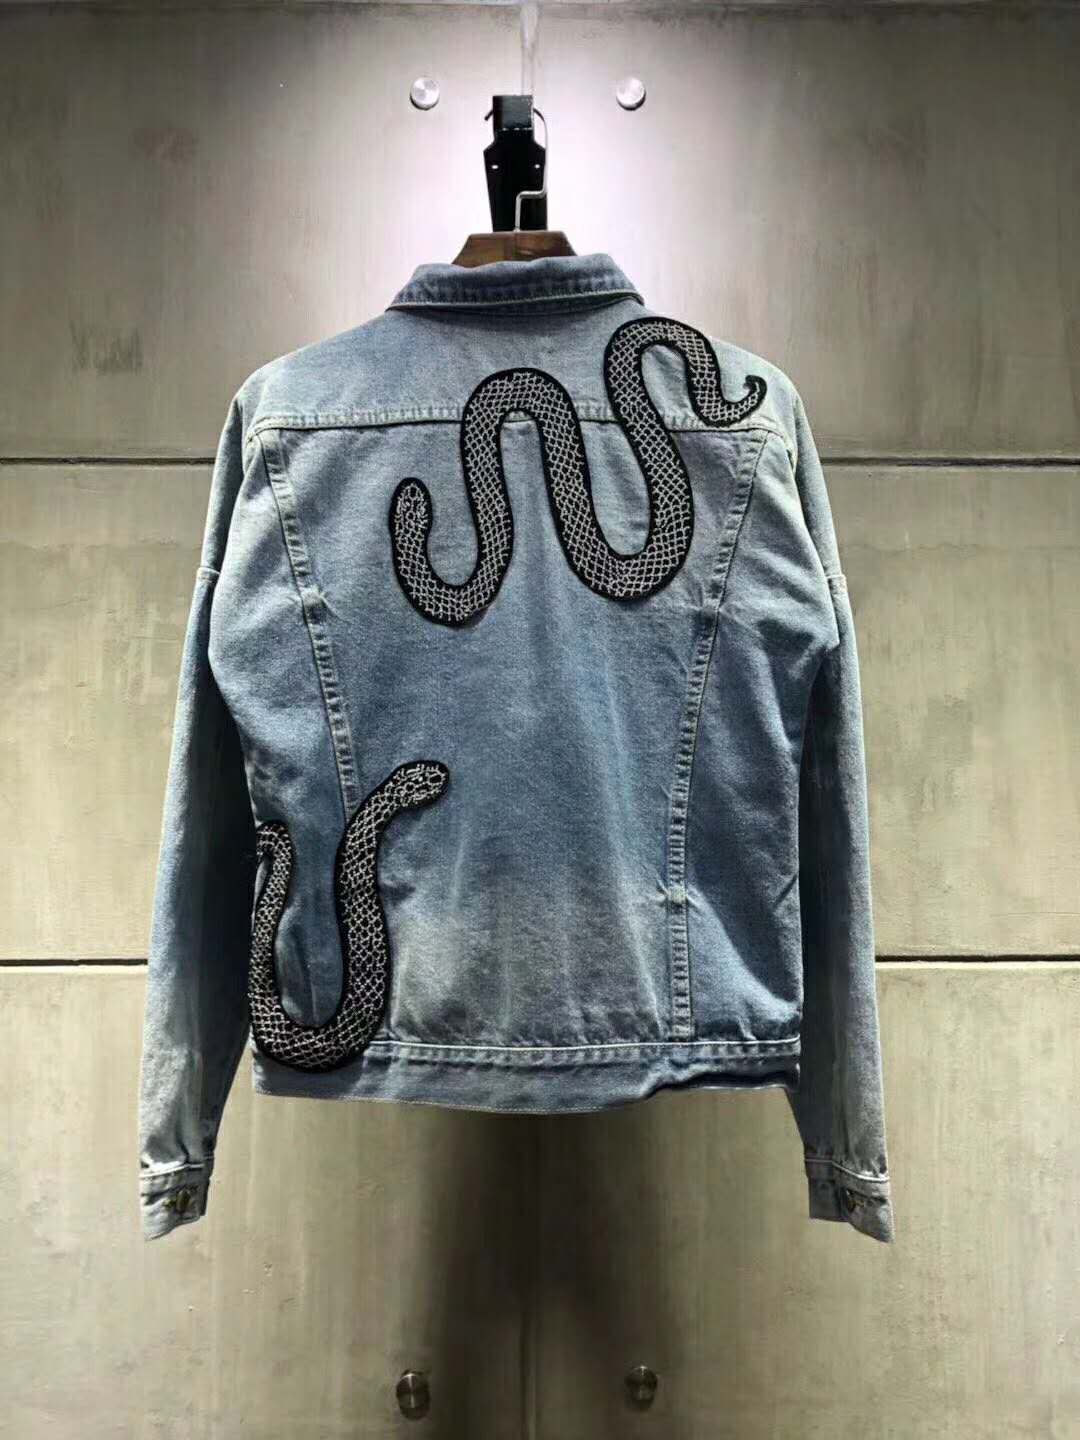 2019 NEW Fashion Mens Denim Jacket Mens Jackets Blue Embroidered Snake Jean  Jacket Ripped Denim Coats From Kengqiangmeigui88, $76.44